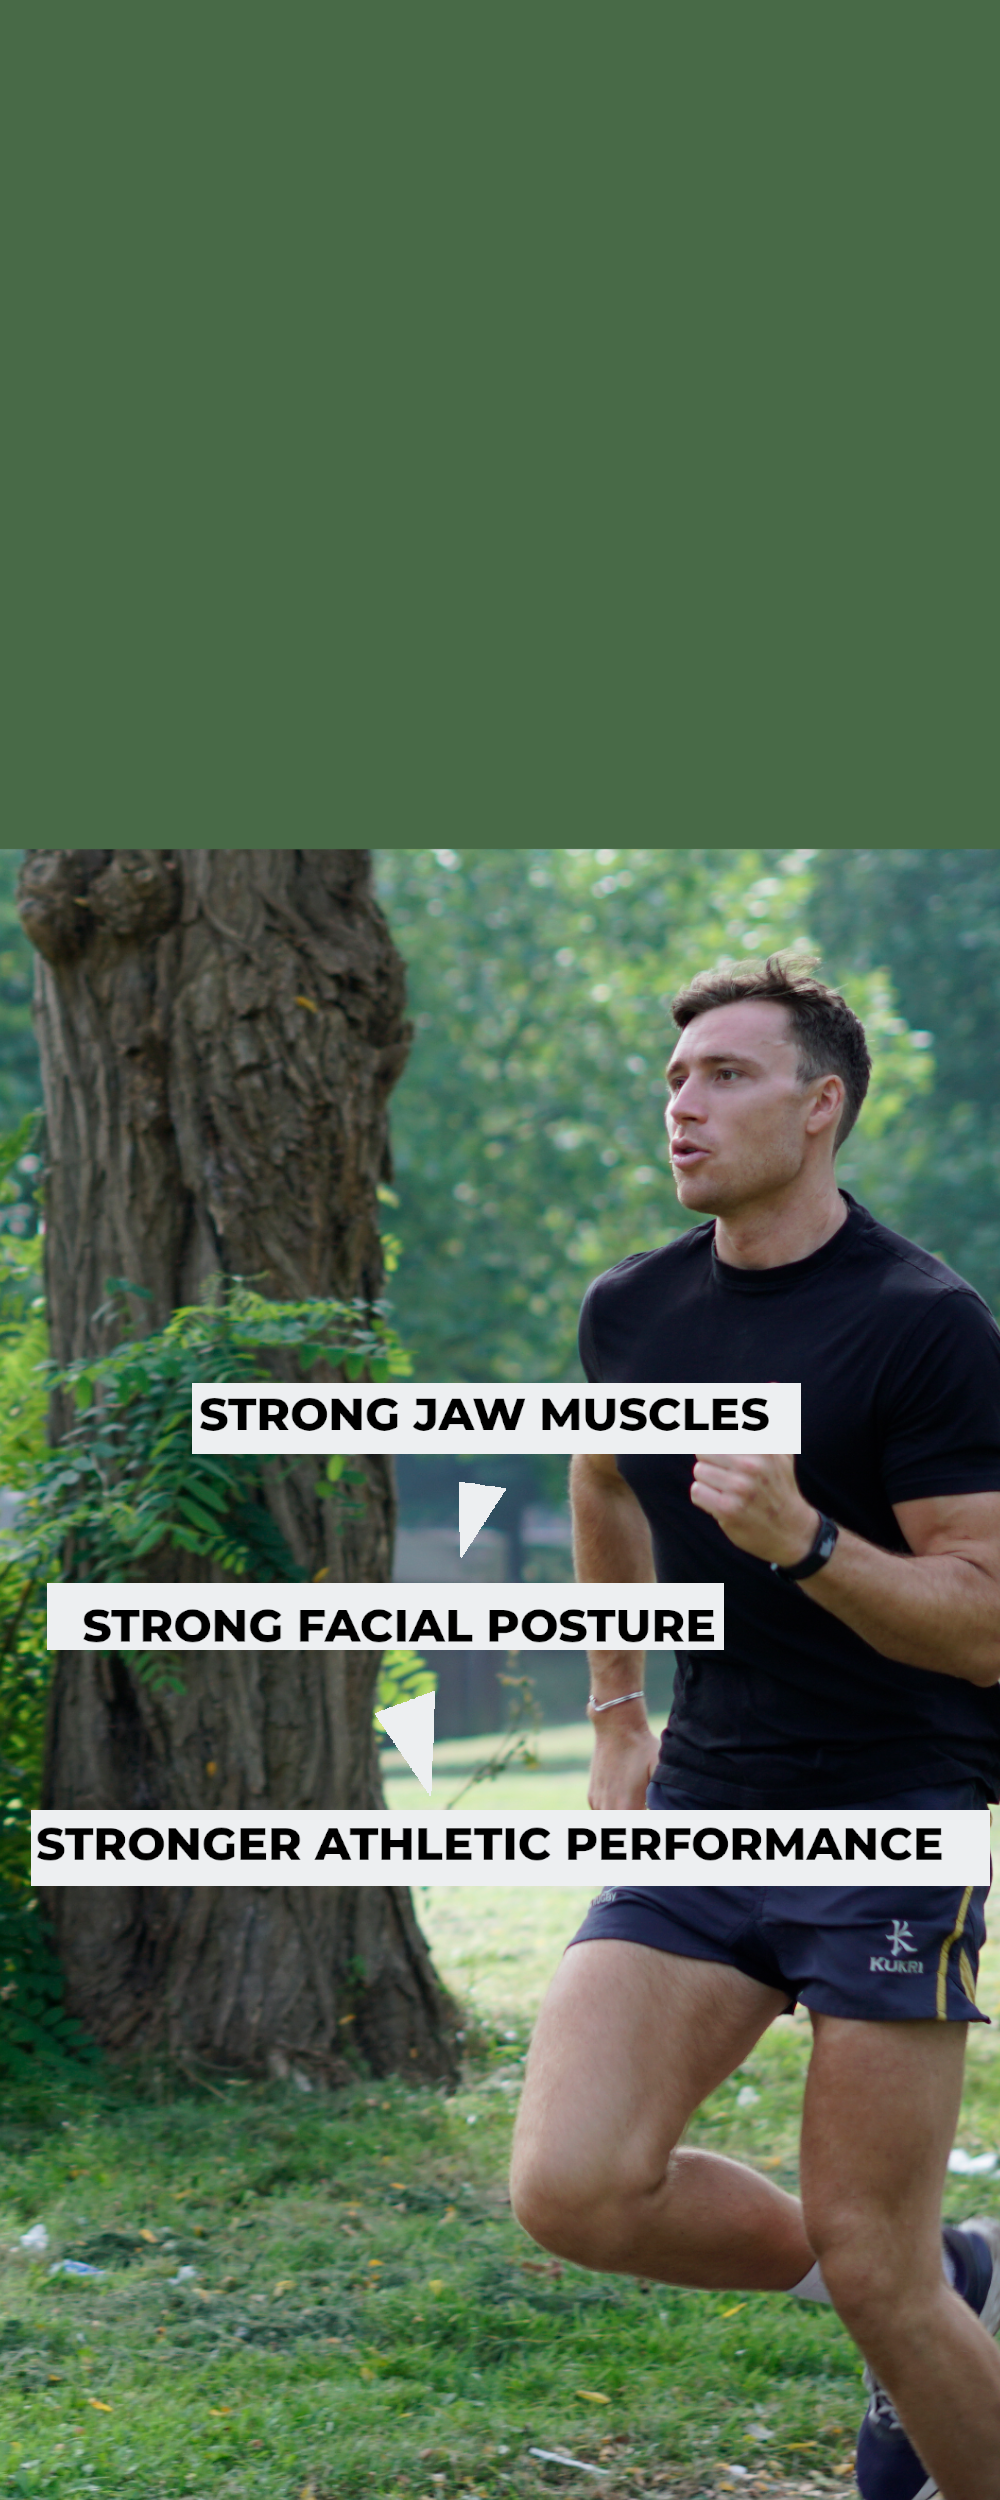 Excel Jawline Exerciser for Powerful Jaw Workout, Kazakhstan